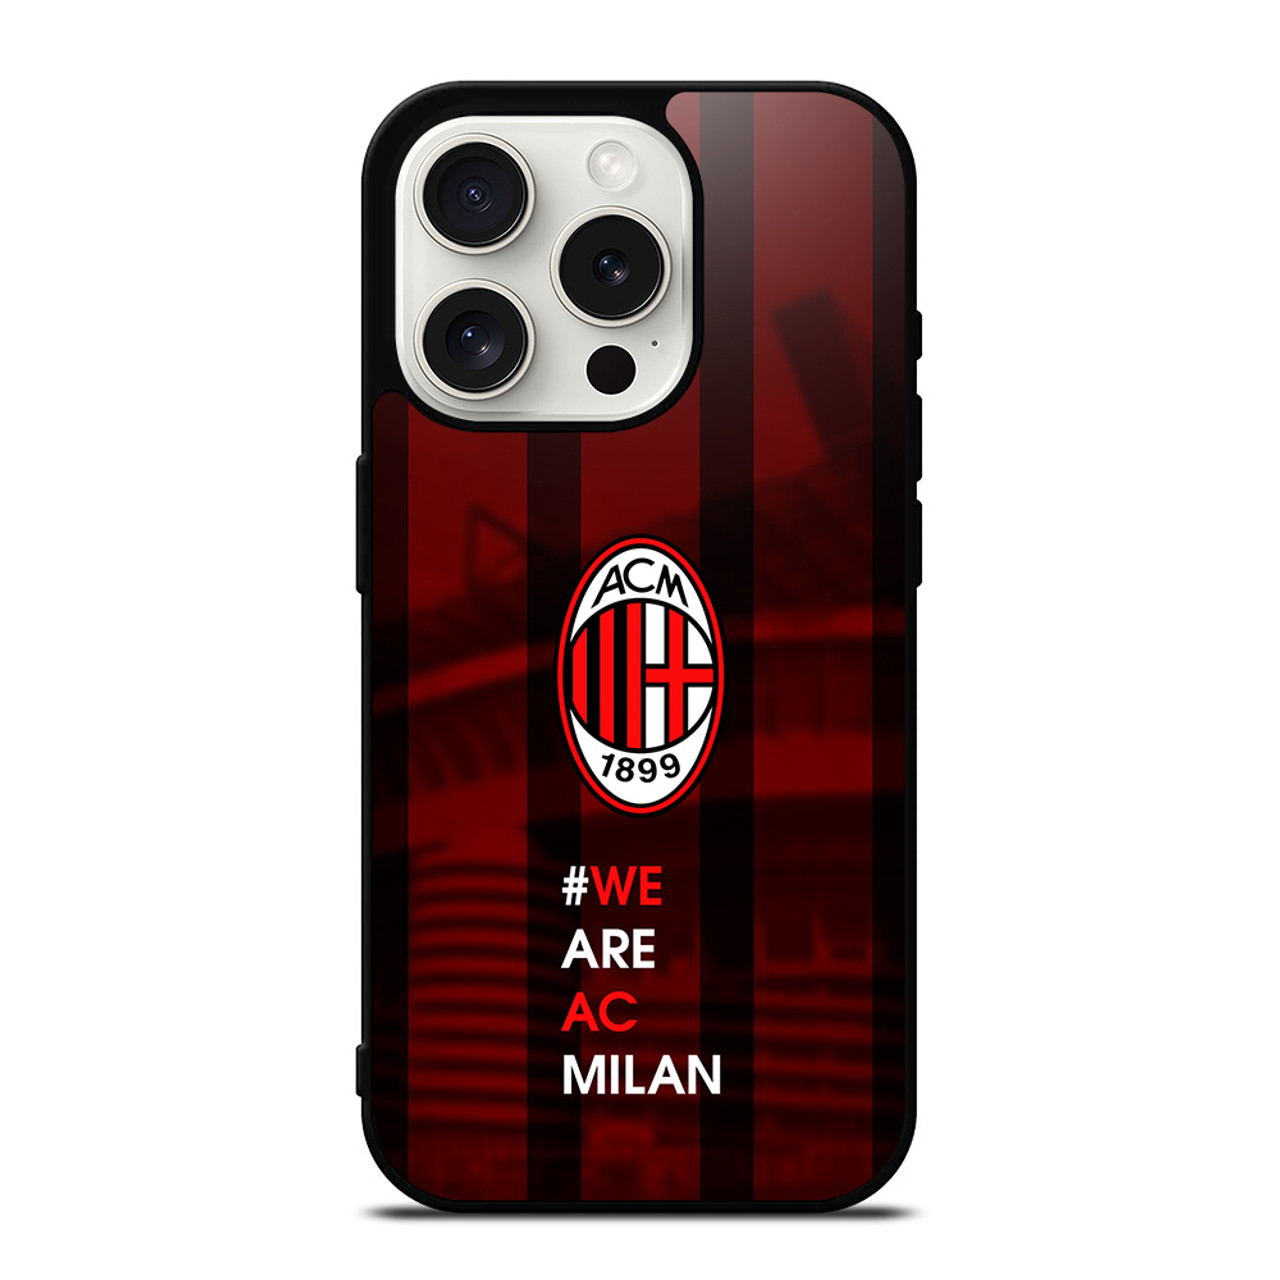 https://cdn11.bigcommerce.com/s-1obwgivpkz/images/stencil/1280x1280/products/175315/201386/WE%20ARE%20AC%20MILAN__59143.1696959427.jpg?c=1